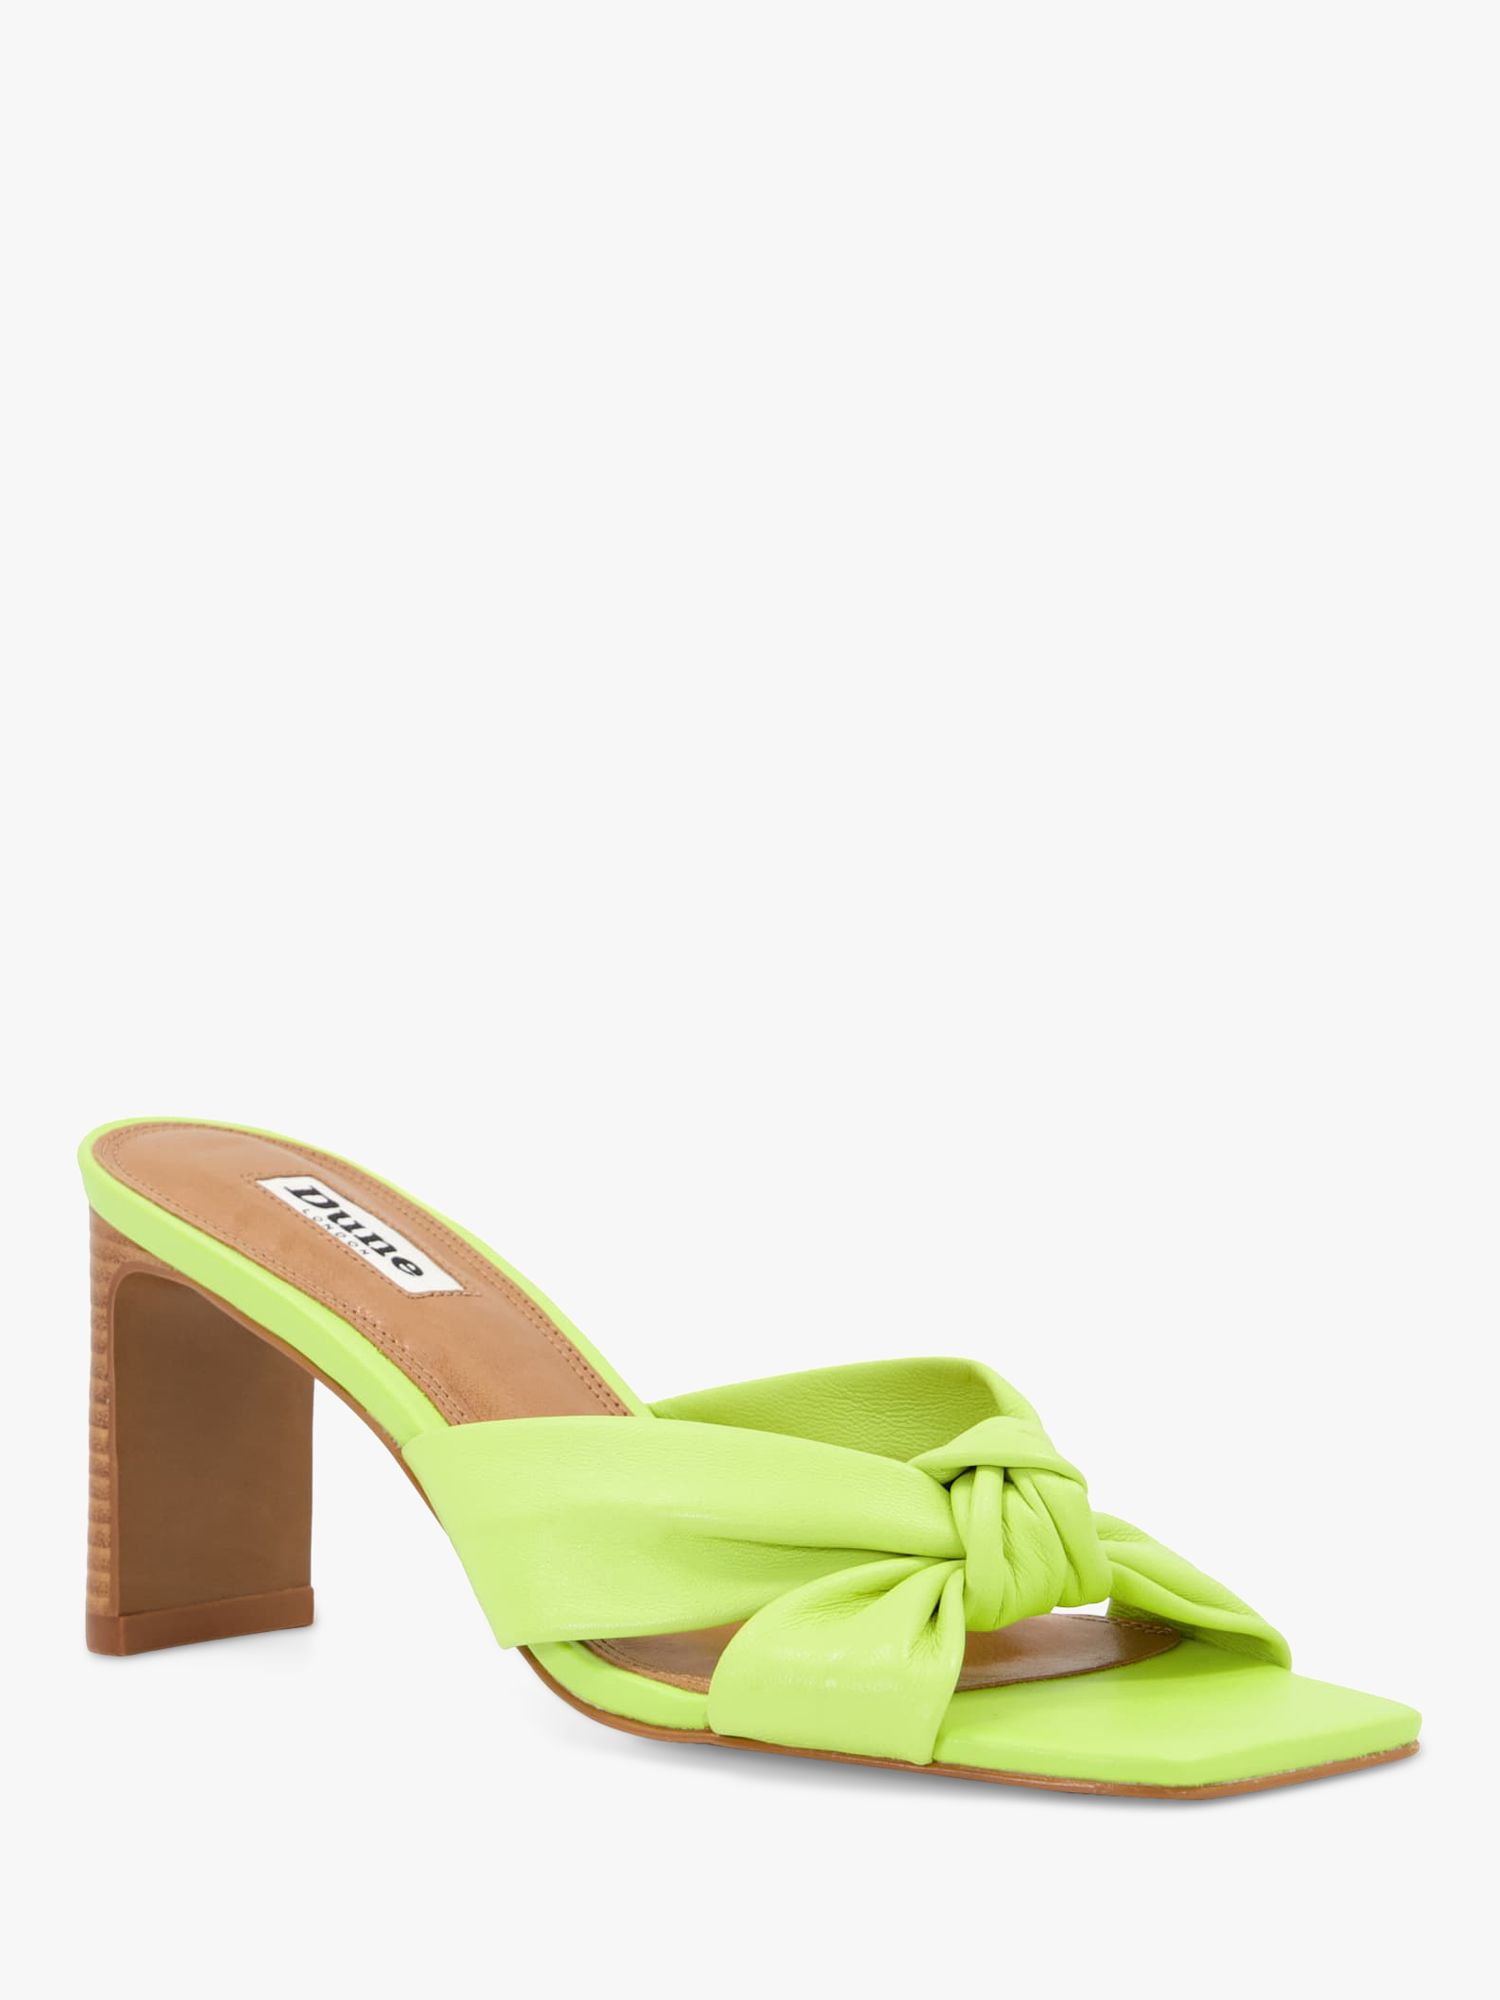 Buy Dune Maize Leather Mules Online at johnlewis.com